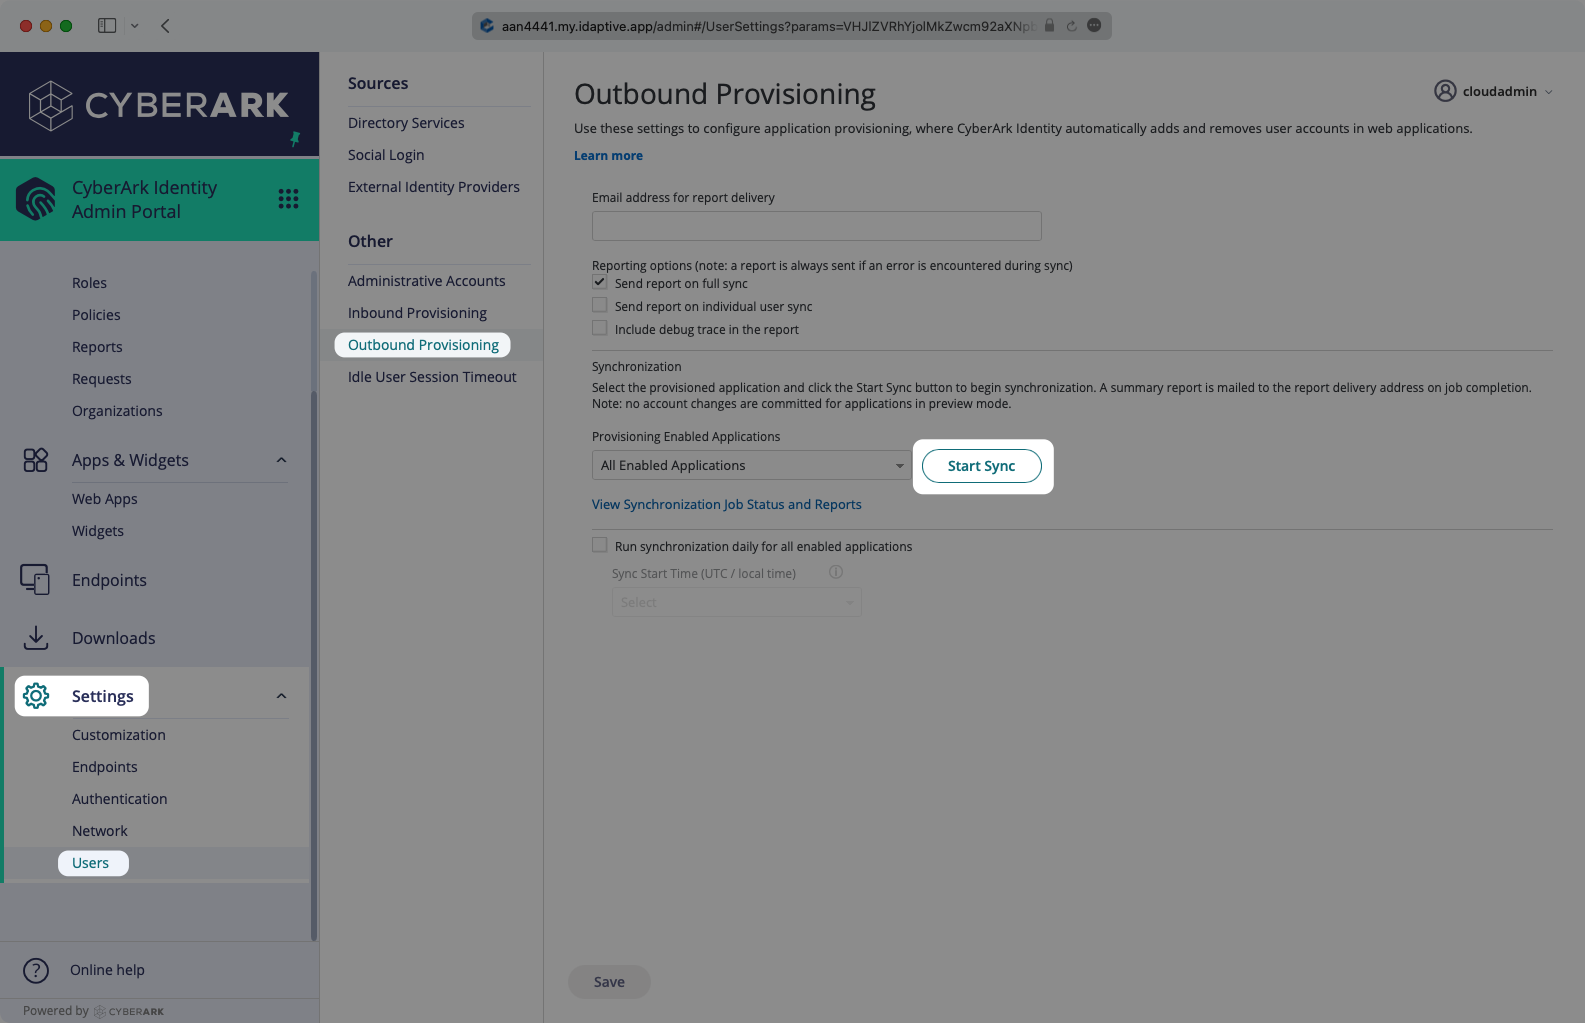 A screenshot showing where to select "Start Sync" in the "Outbound Provisioning" settings in the CyberArk dashboard.